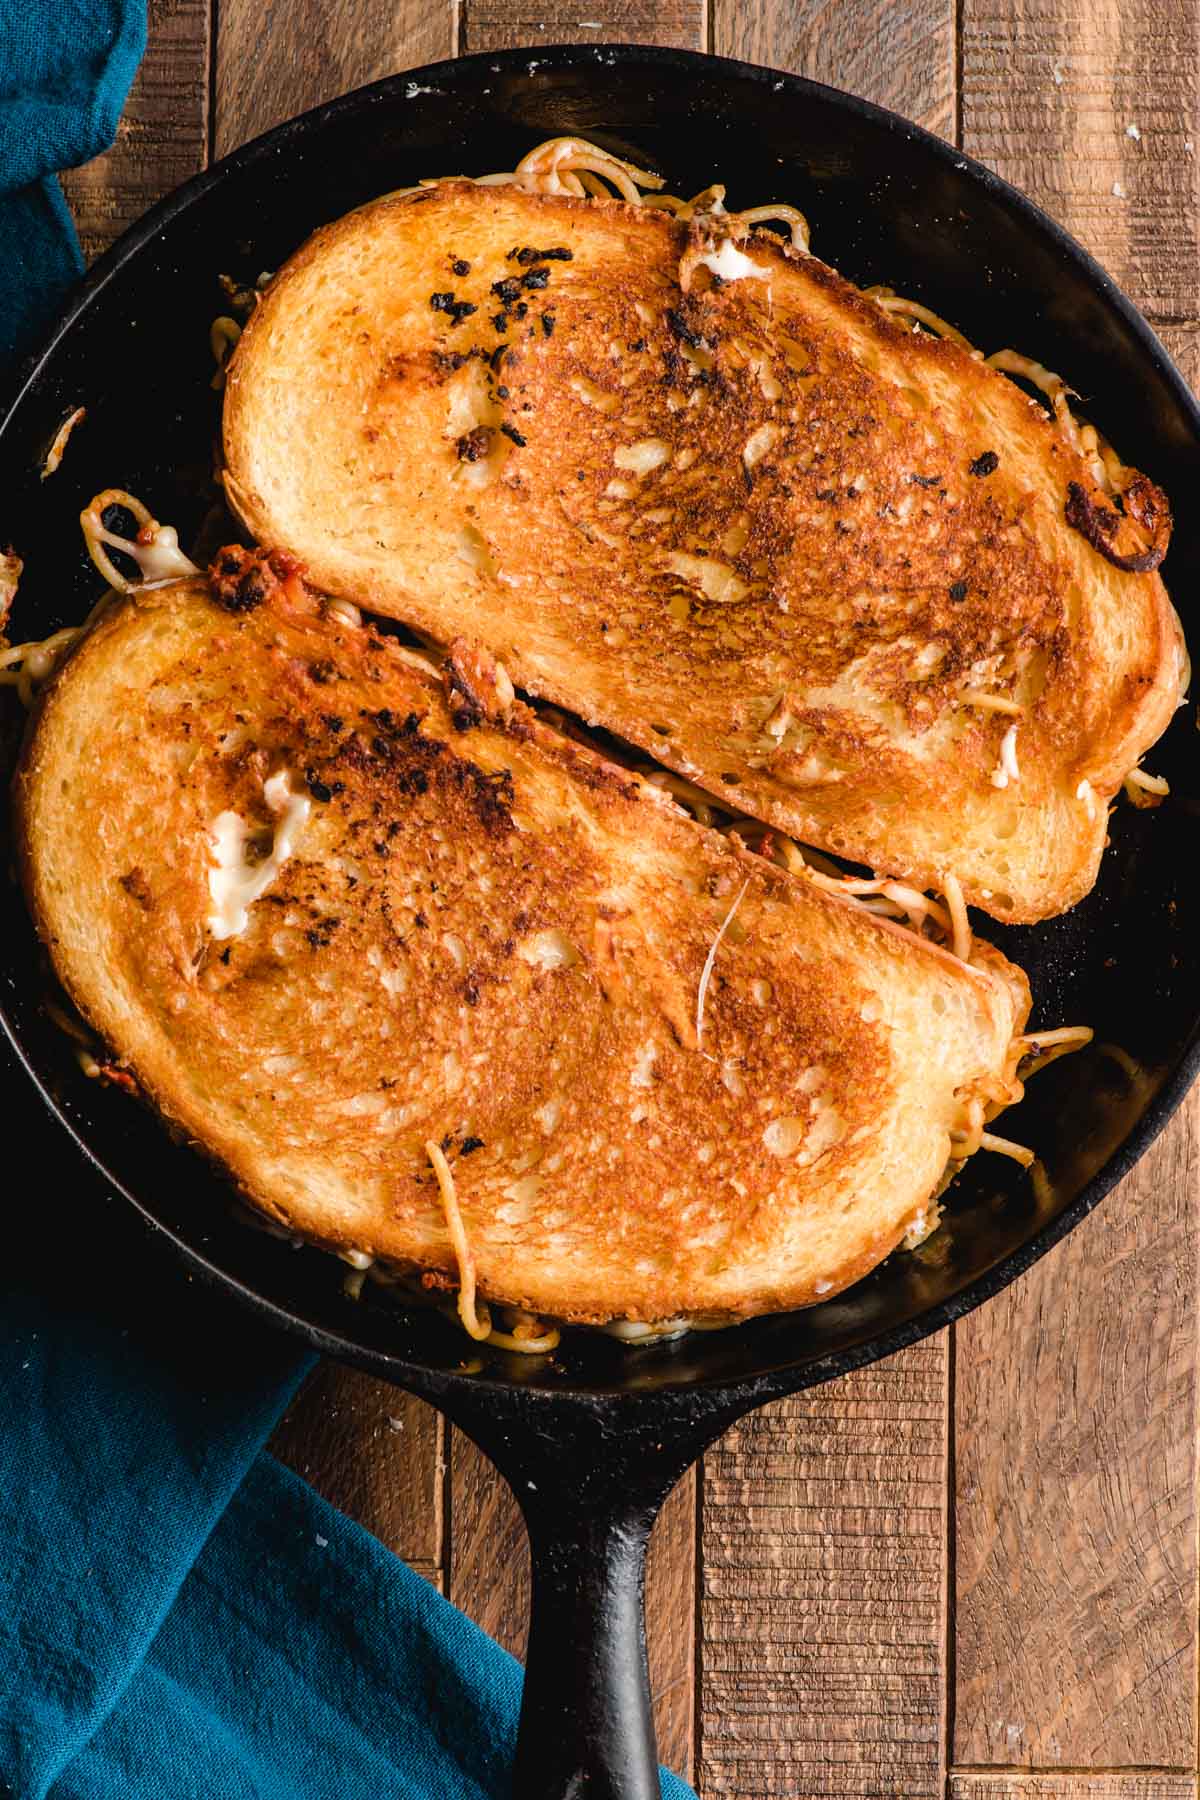 Two grilled cheeses in a cast iron skillet.